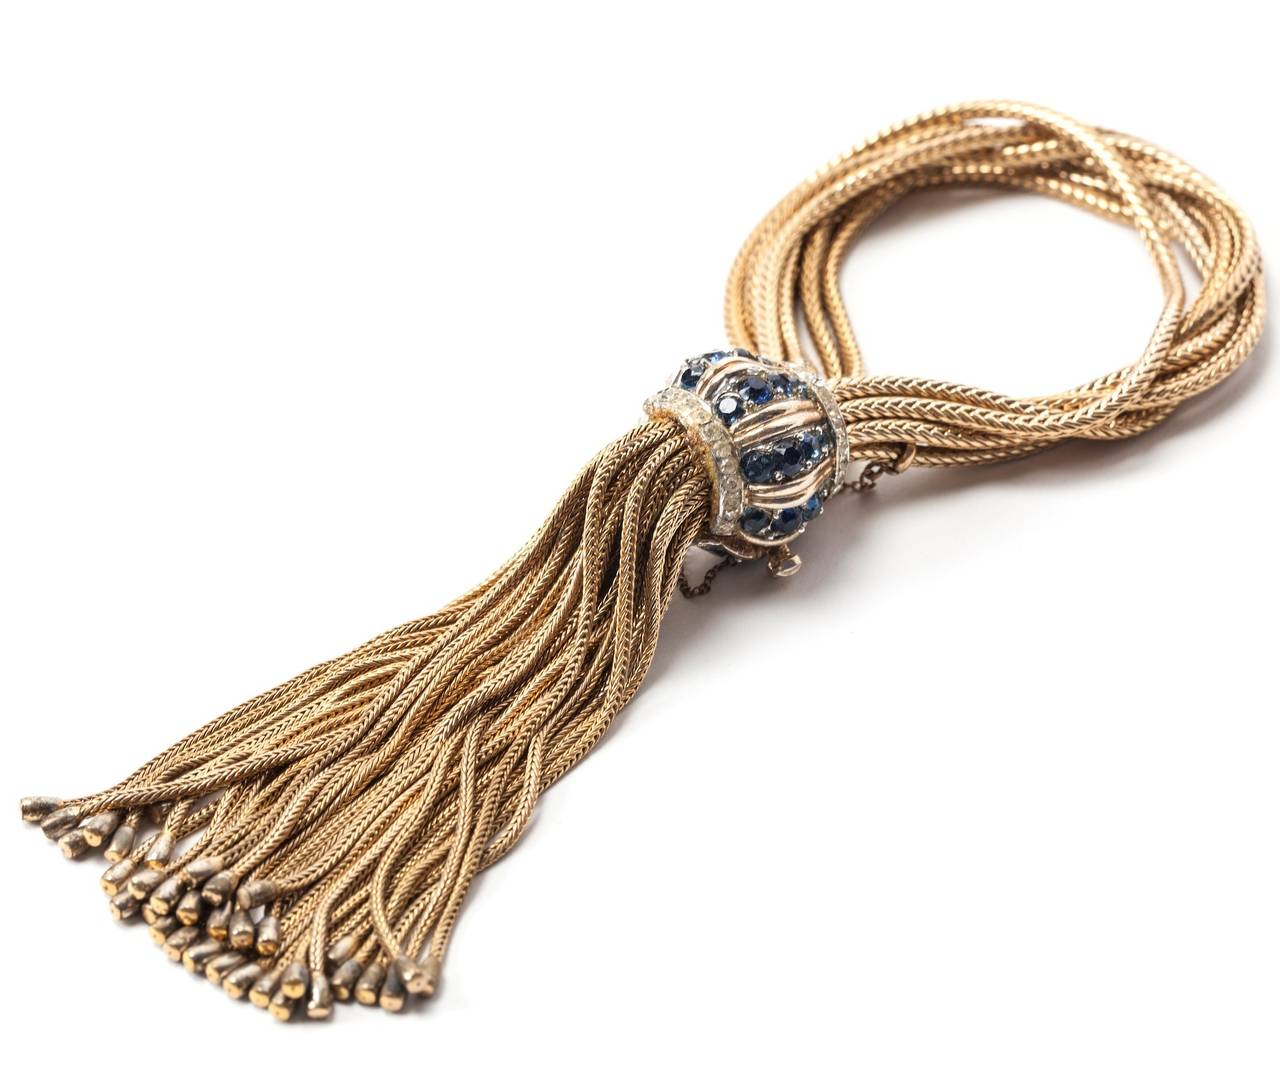 Amazing Boucher Retro Tassel Bracelet from the 1940's. A series of gilded fox chains are used to form the bracelet and faux tassel which falls from the clasp studded with faux sapphires and pastes. 
Marcel Boucher was the creator of some of the